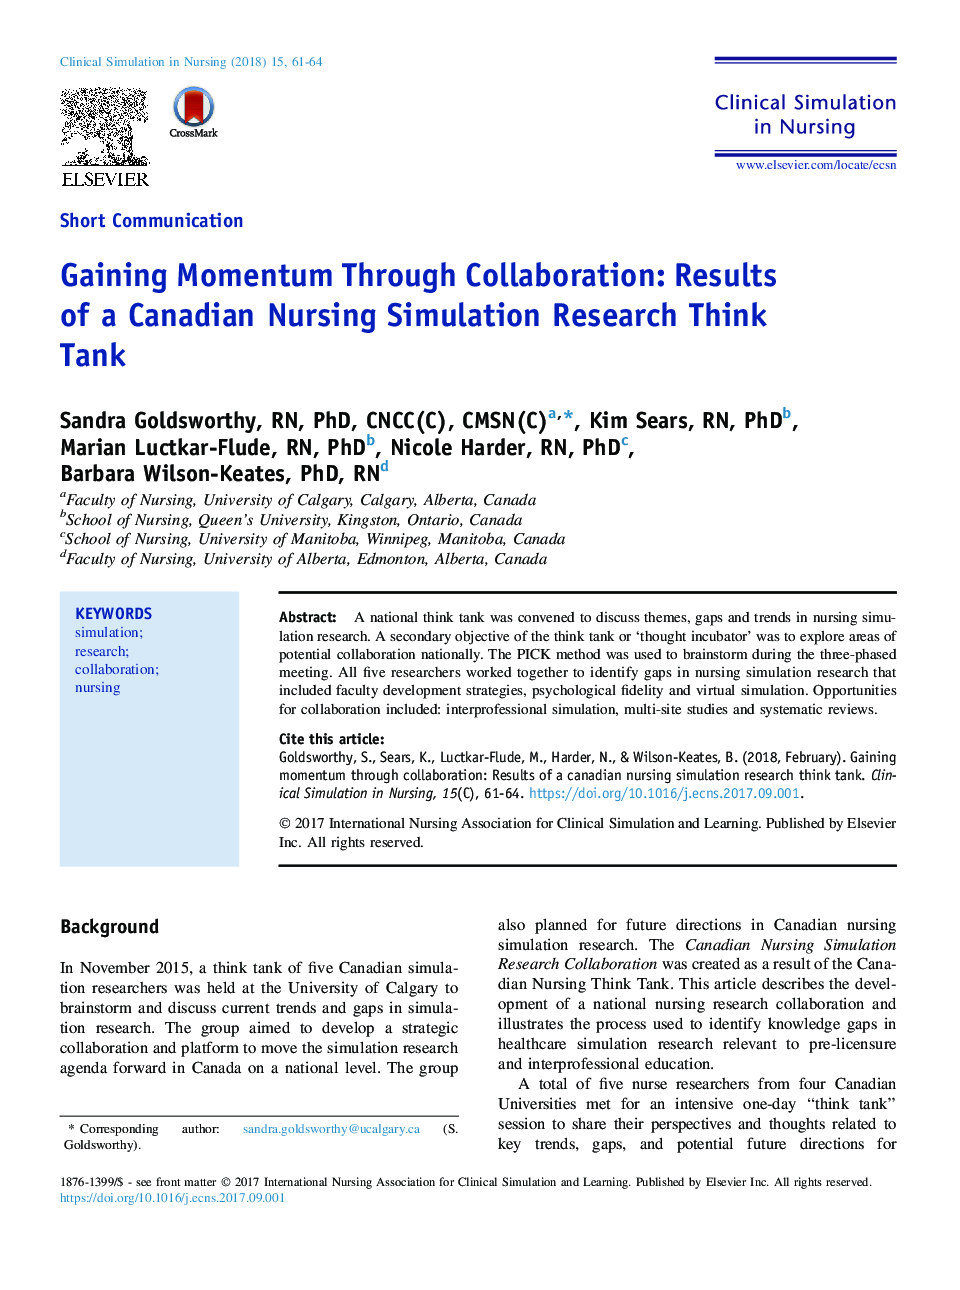 Gaining Momentum Through Collaboration: Results of a Canadian Nursing Simulation Research Think Tank